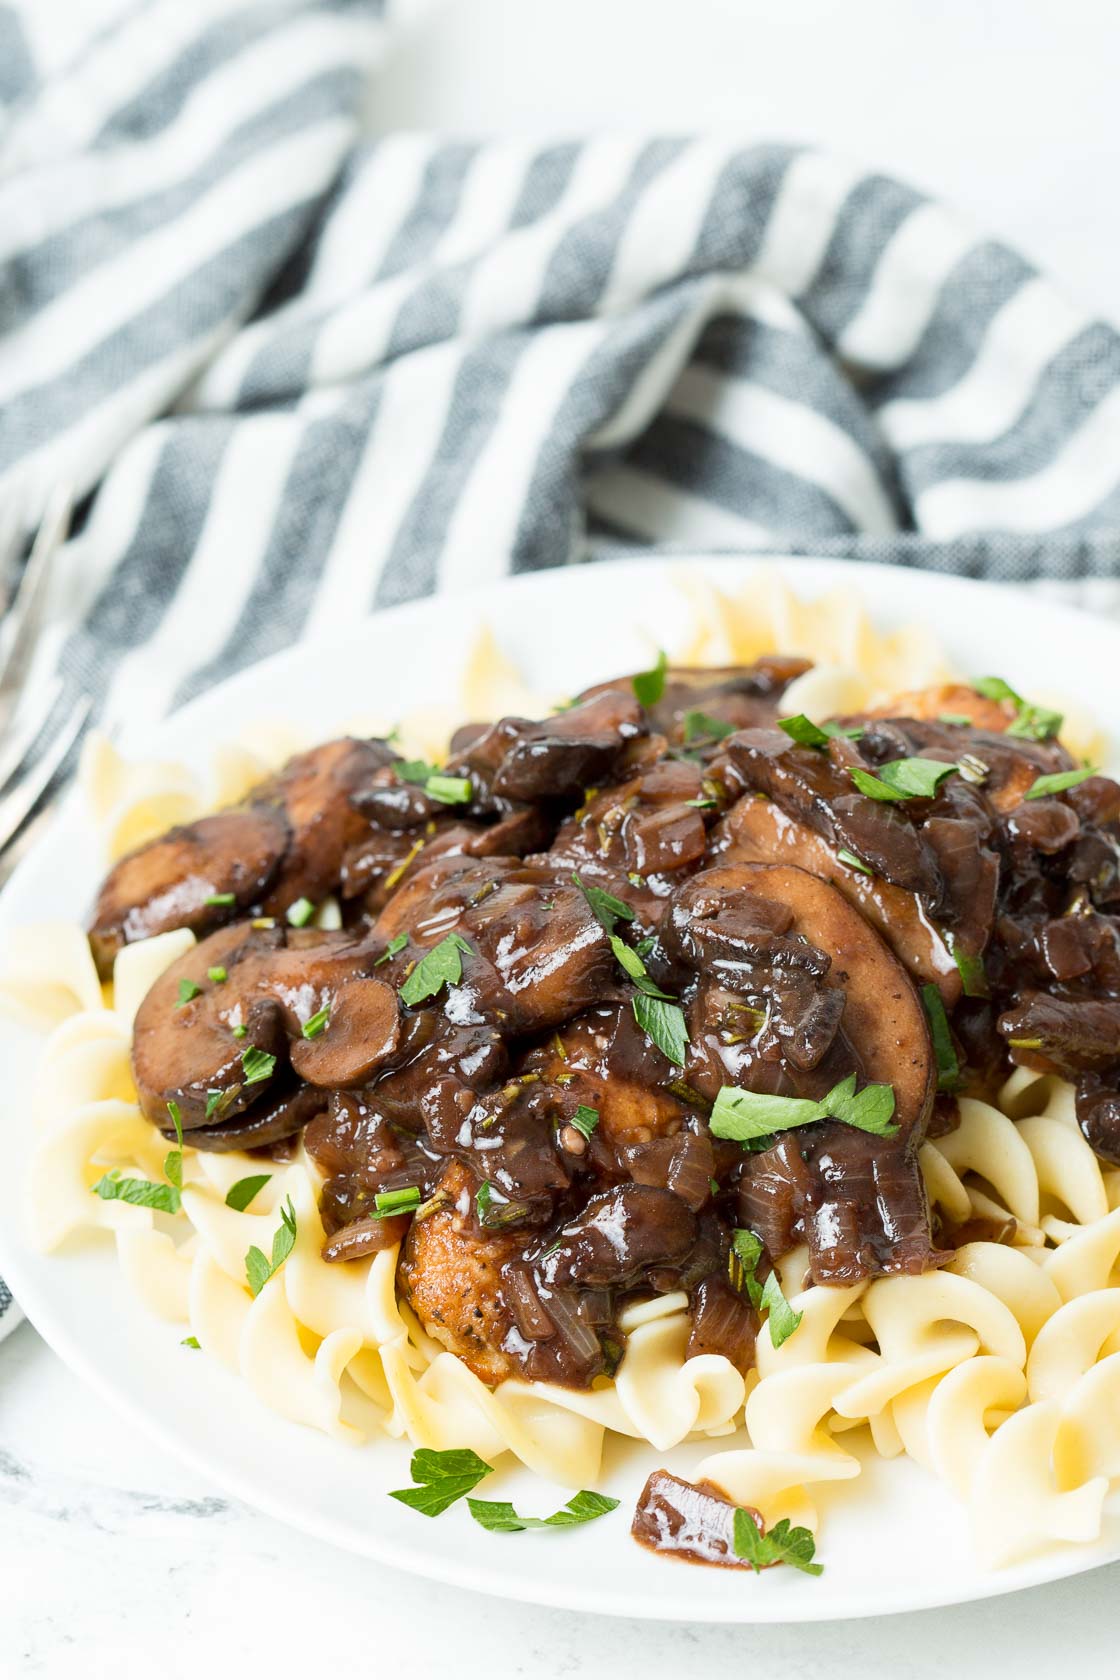 An Awesome French Chicken Stew Recipe - Chicken Bourguignon